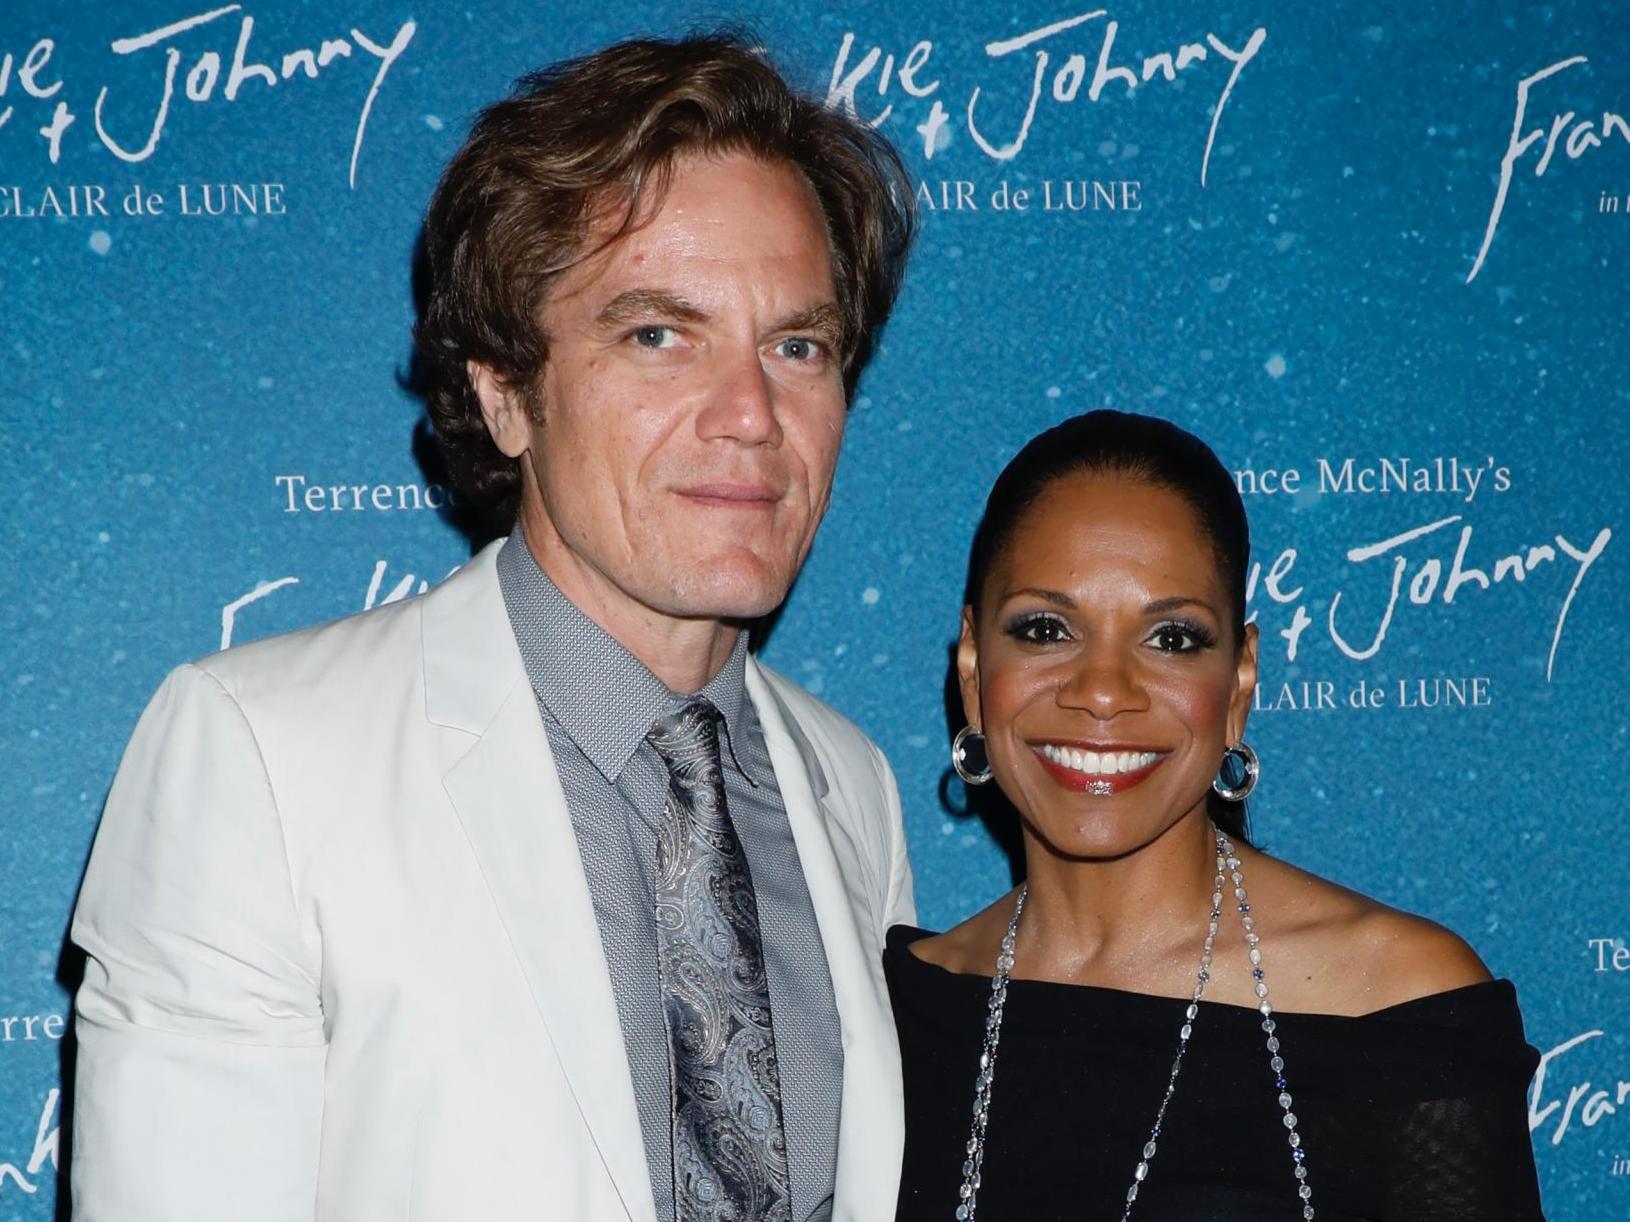 Broadway actor Audra McDonald condemns audience member who took photo during nude scene The Independent The Independent pic